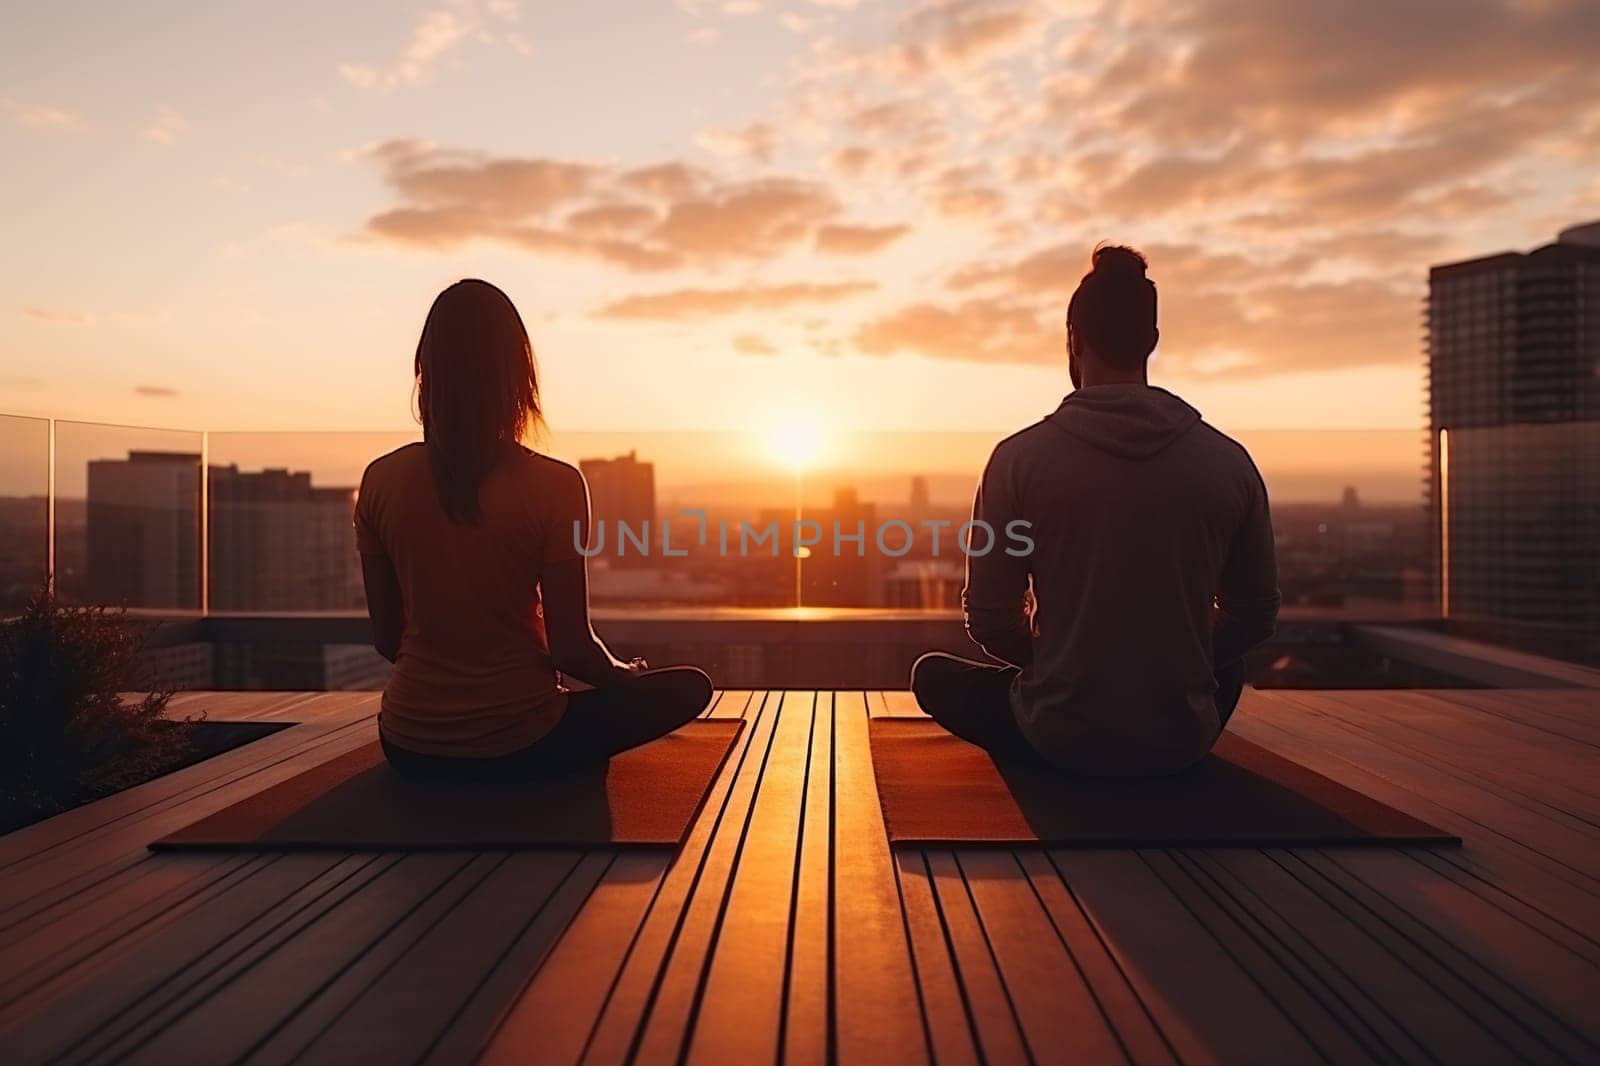 A man and a woman do yoga on the roof of a building at sunset, dawn. Generated by artificial intelligence by Vovmar